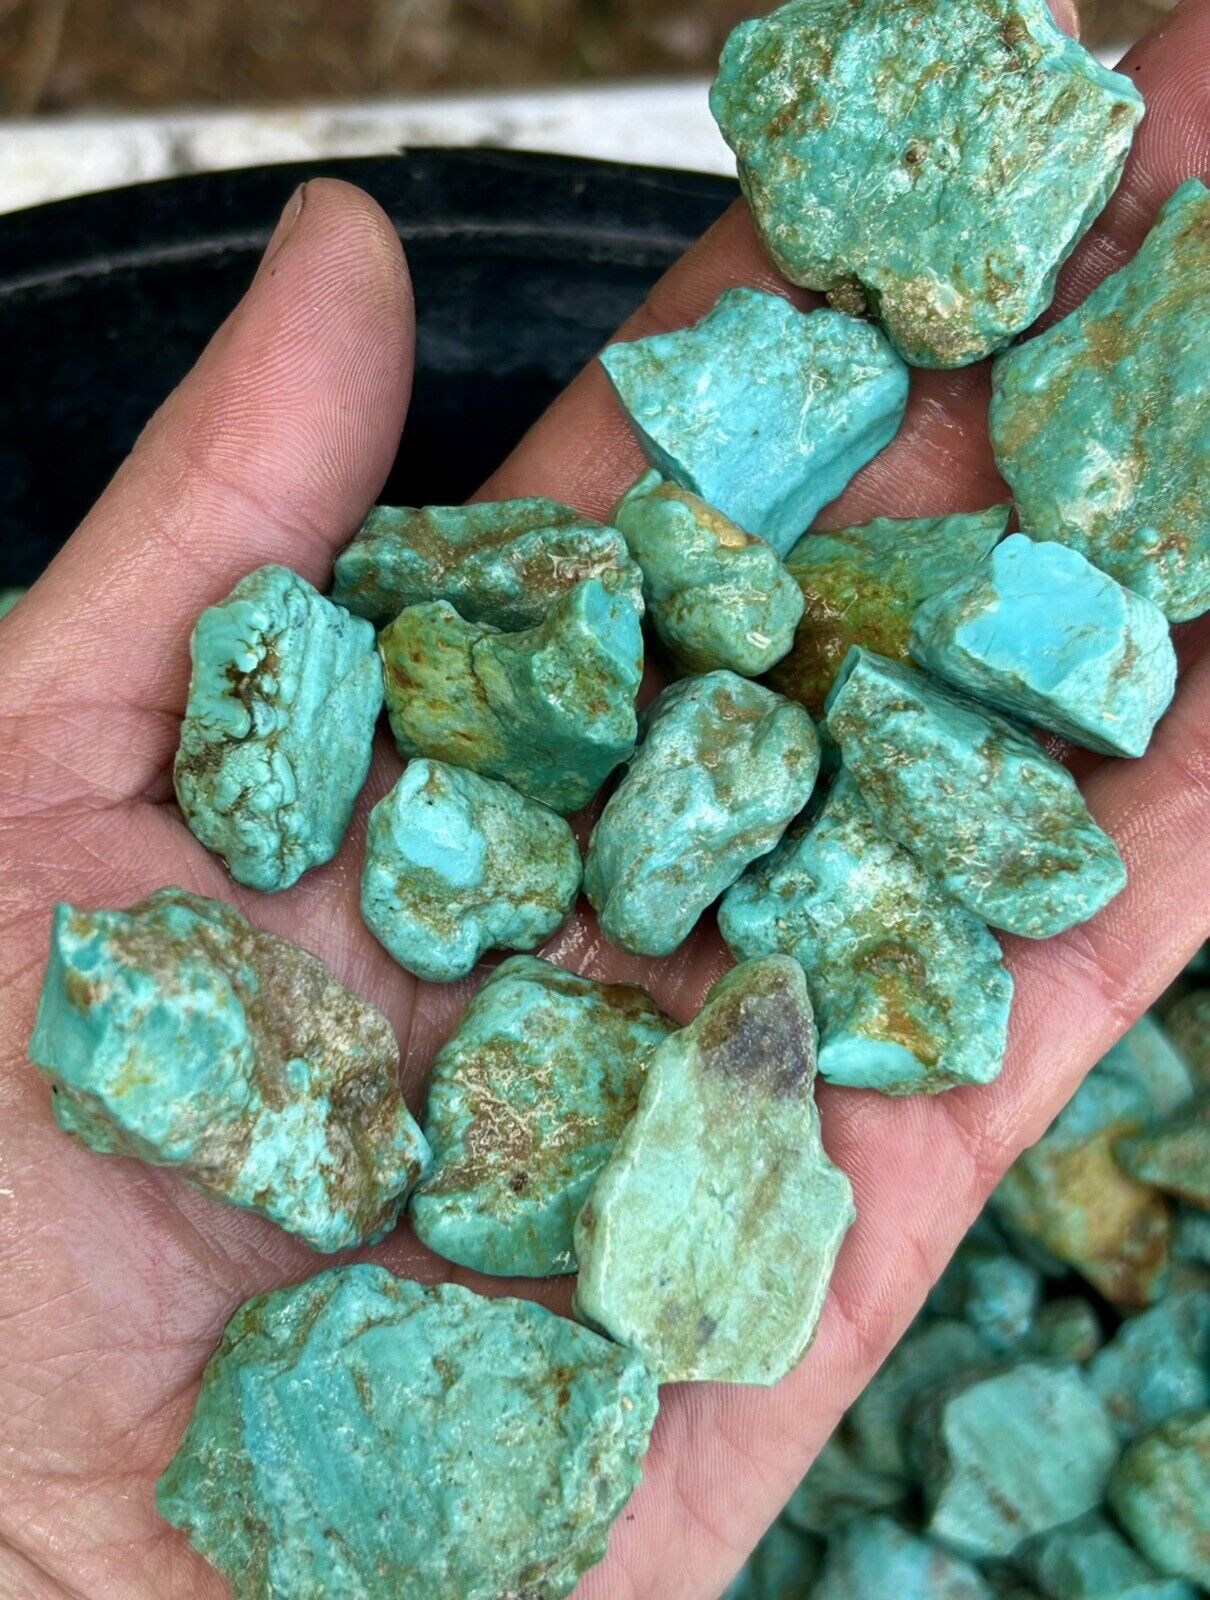 Special Offer: 1 LB of Turquoise Mountain. Classic Light Blue Genuine Turquoise